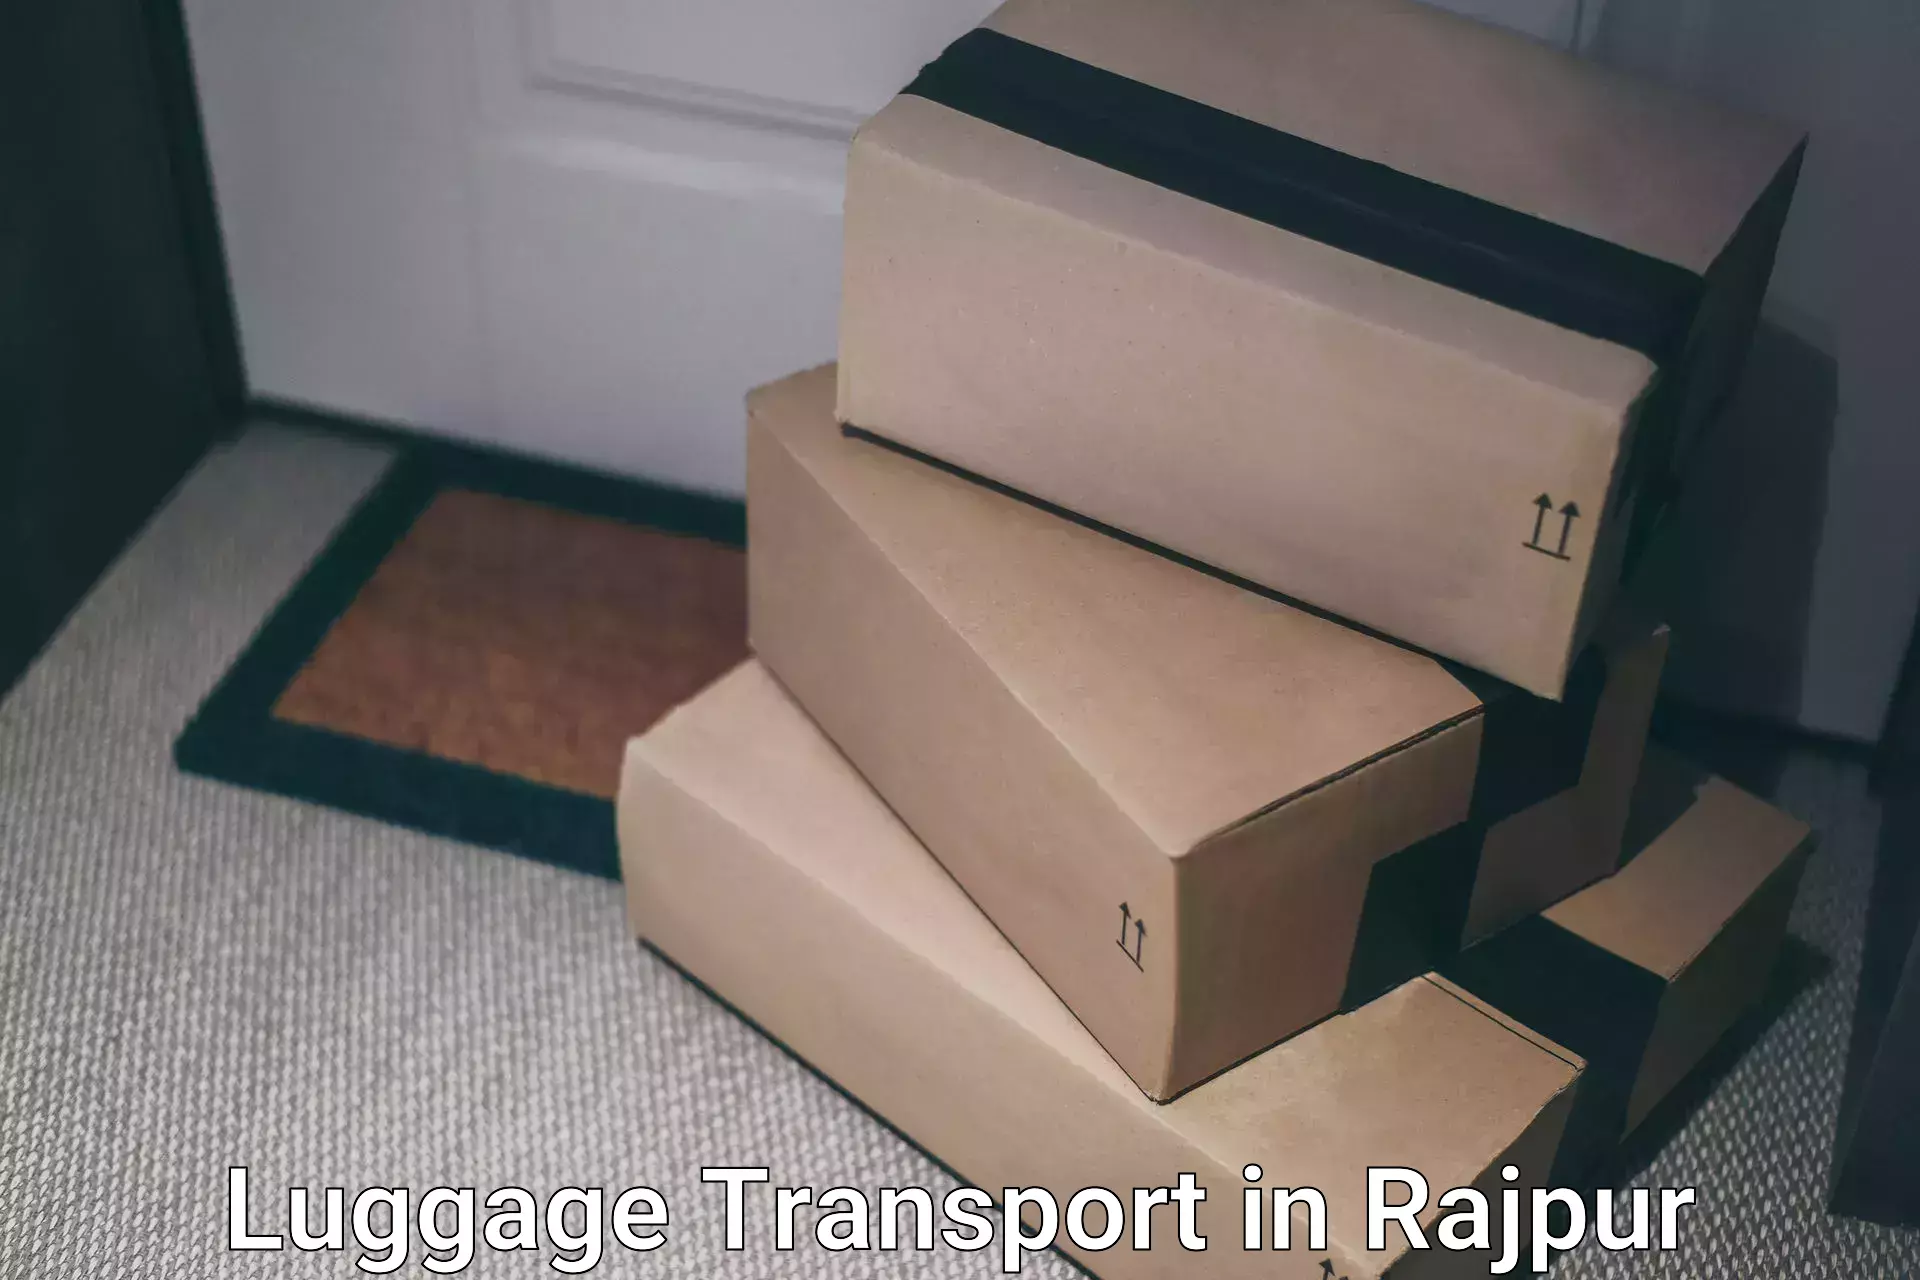 Baggage delivery management in Rajpur